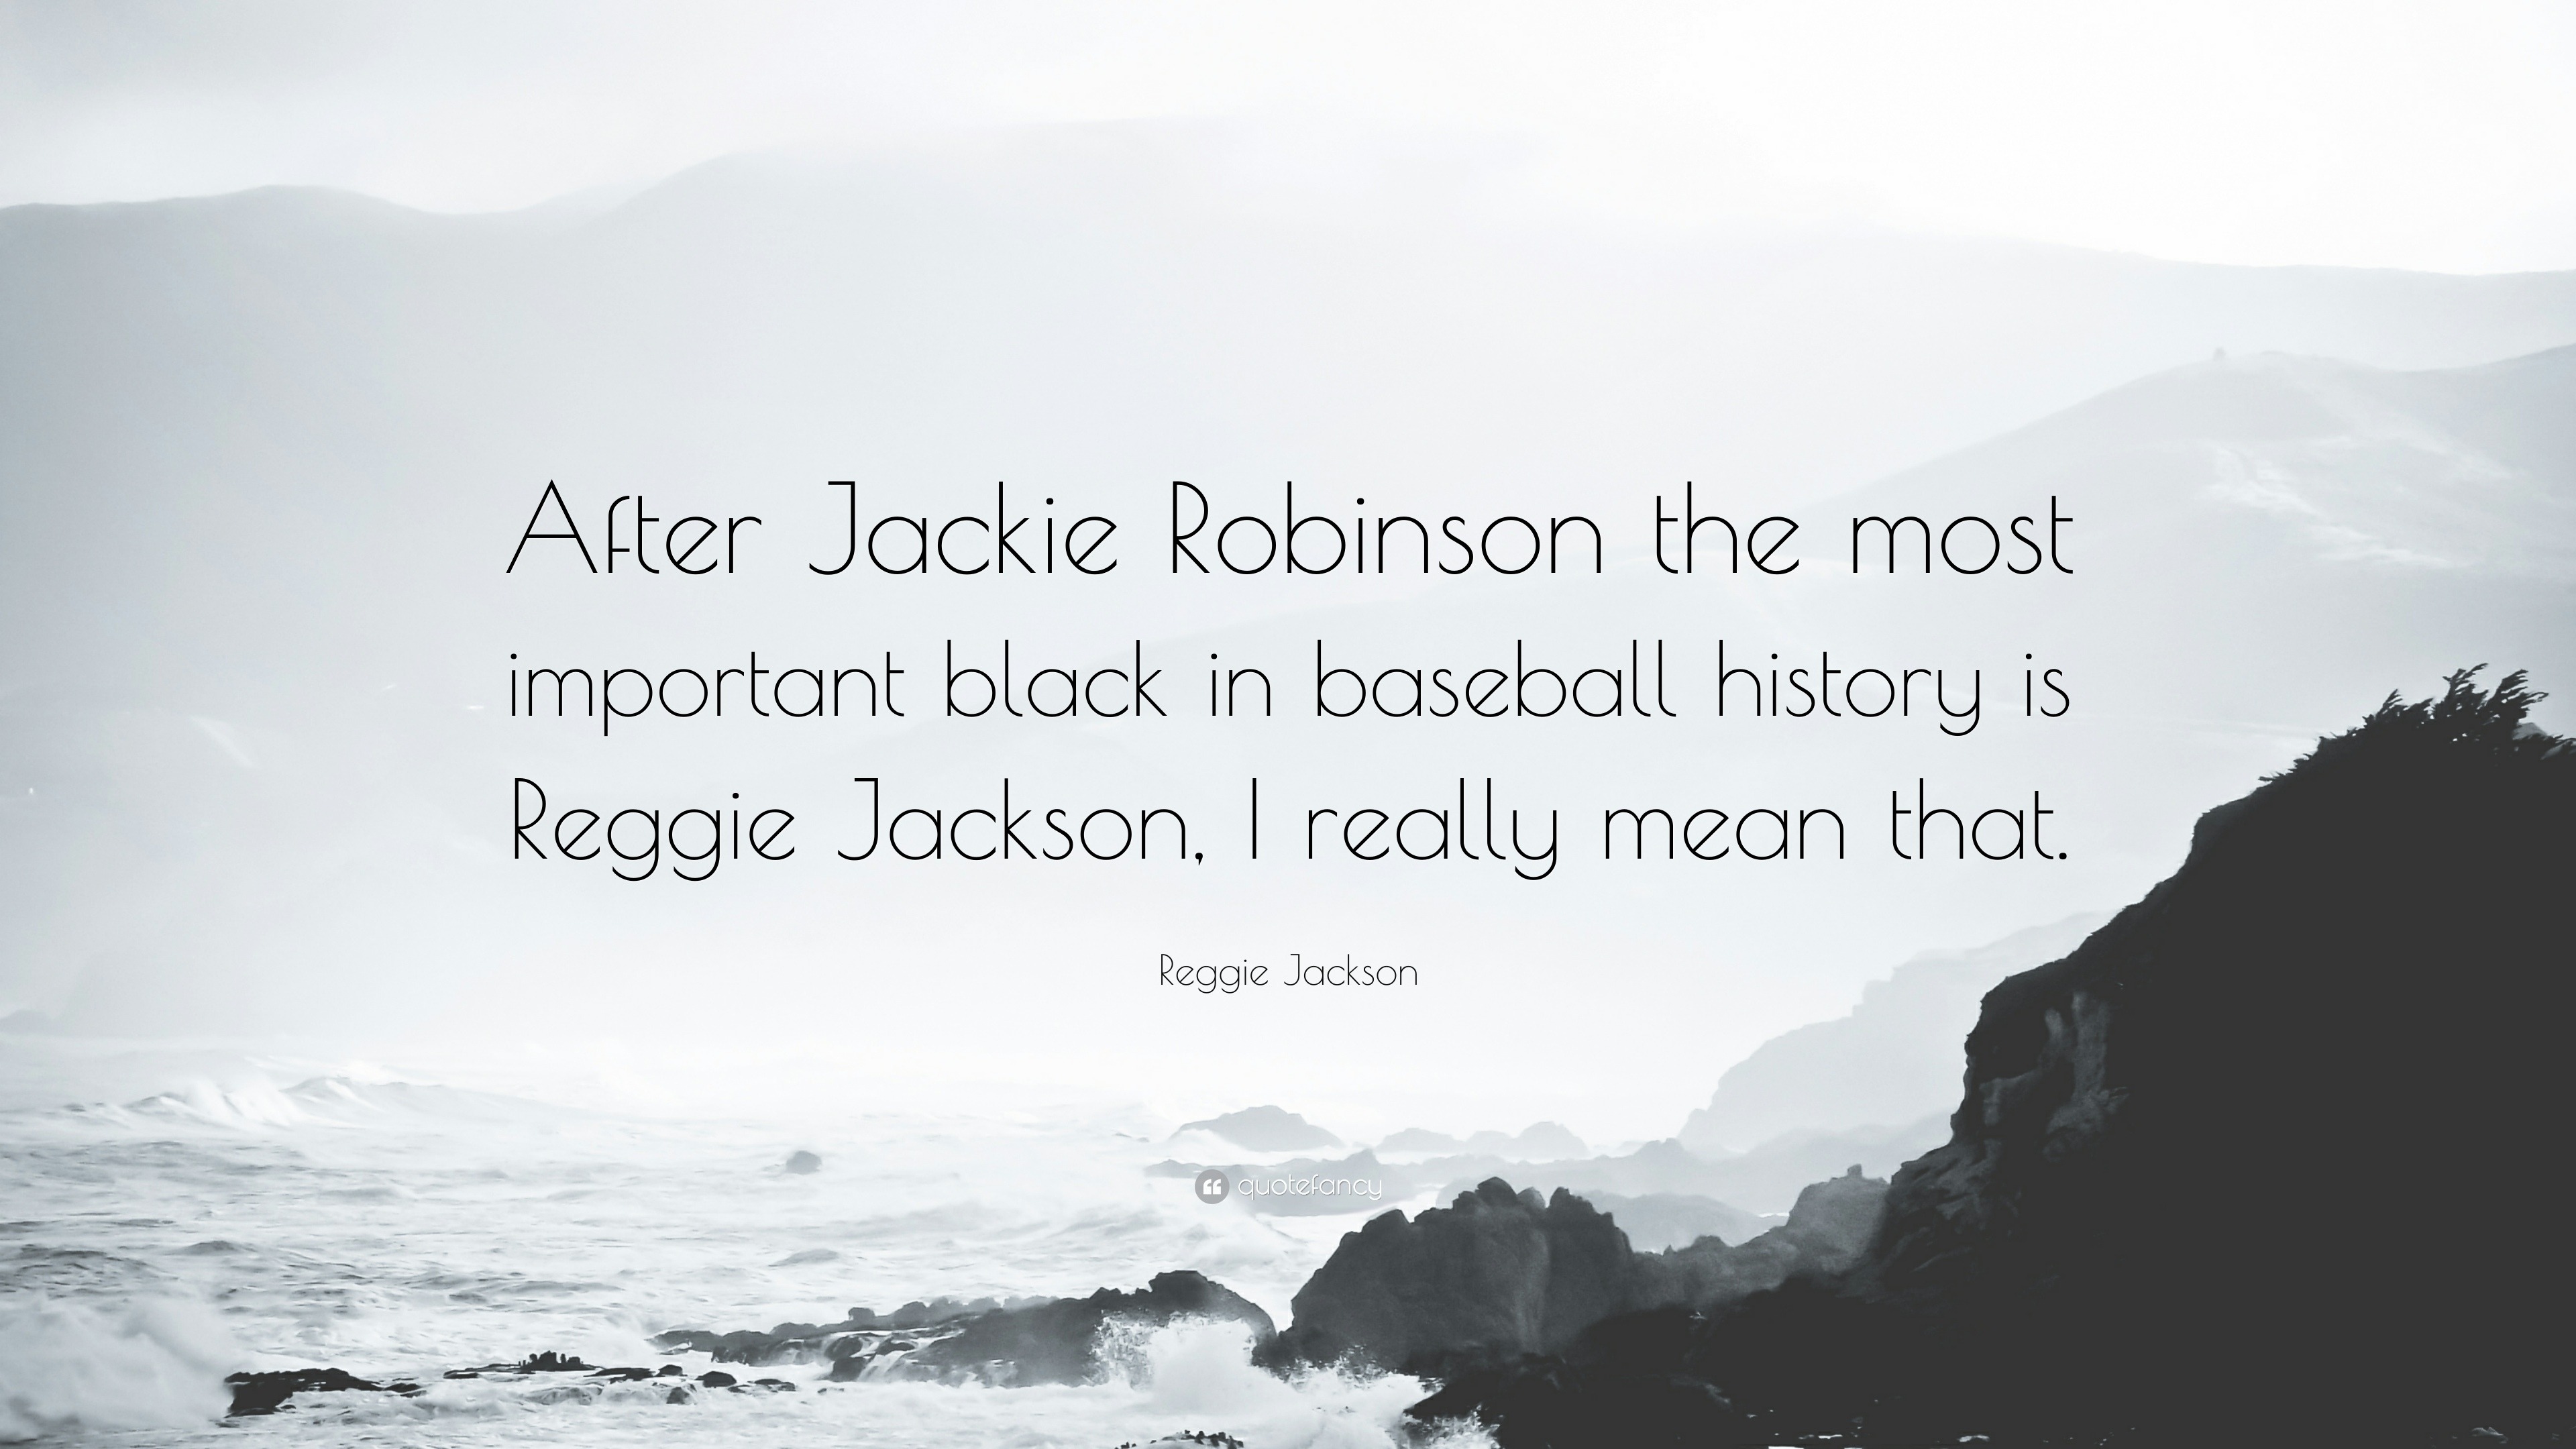 Reggie Jackson Quote: “After Jackie Robinson the most important black in  baseball history is Reggie Jackson